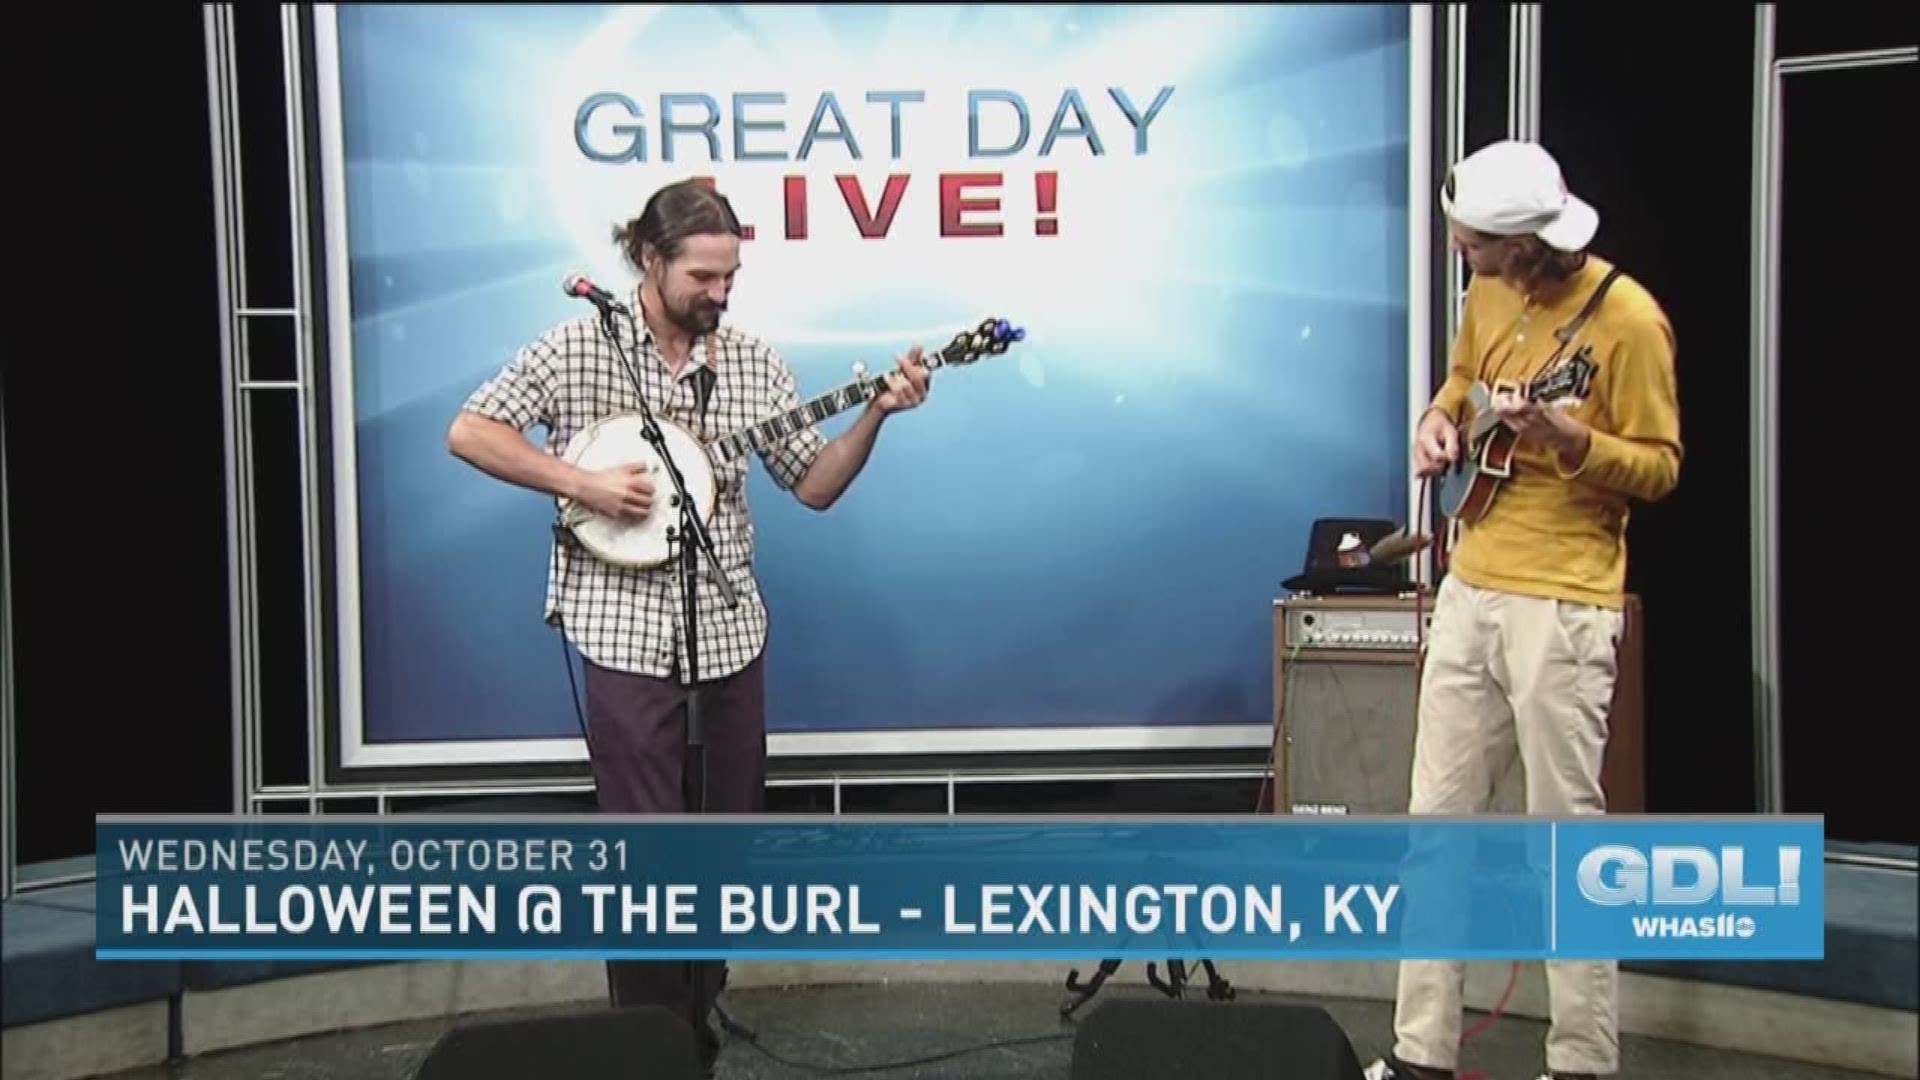 Jonathan Bramel and Chris Cupp of Restless Leg String Band perform on Great Day Live.